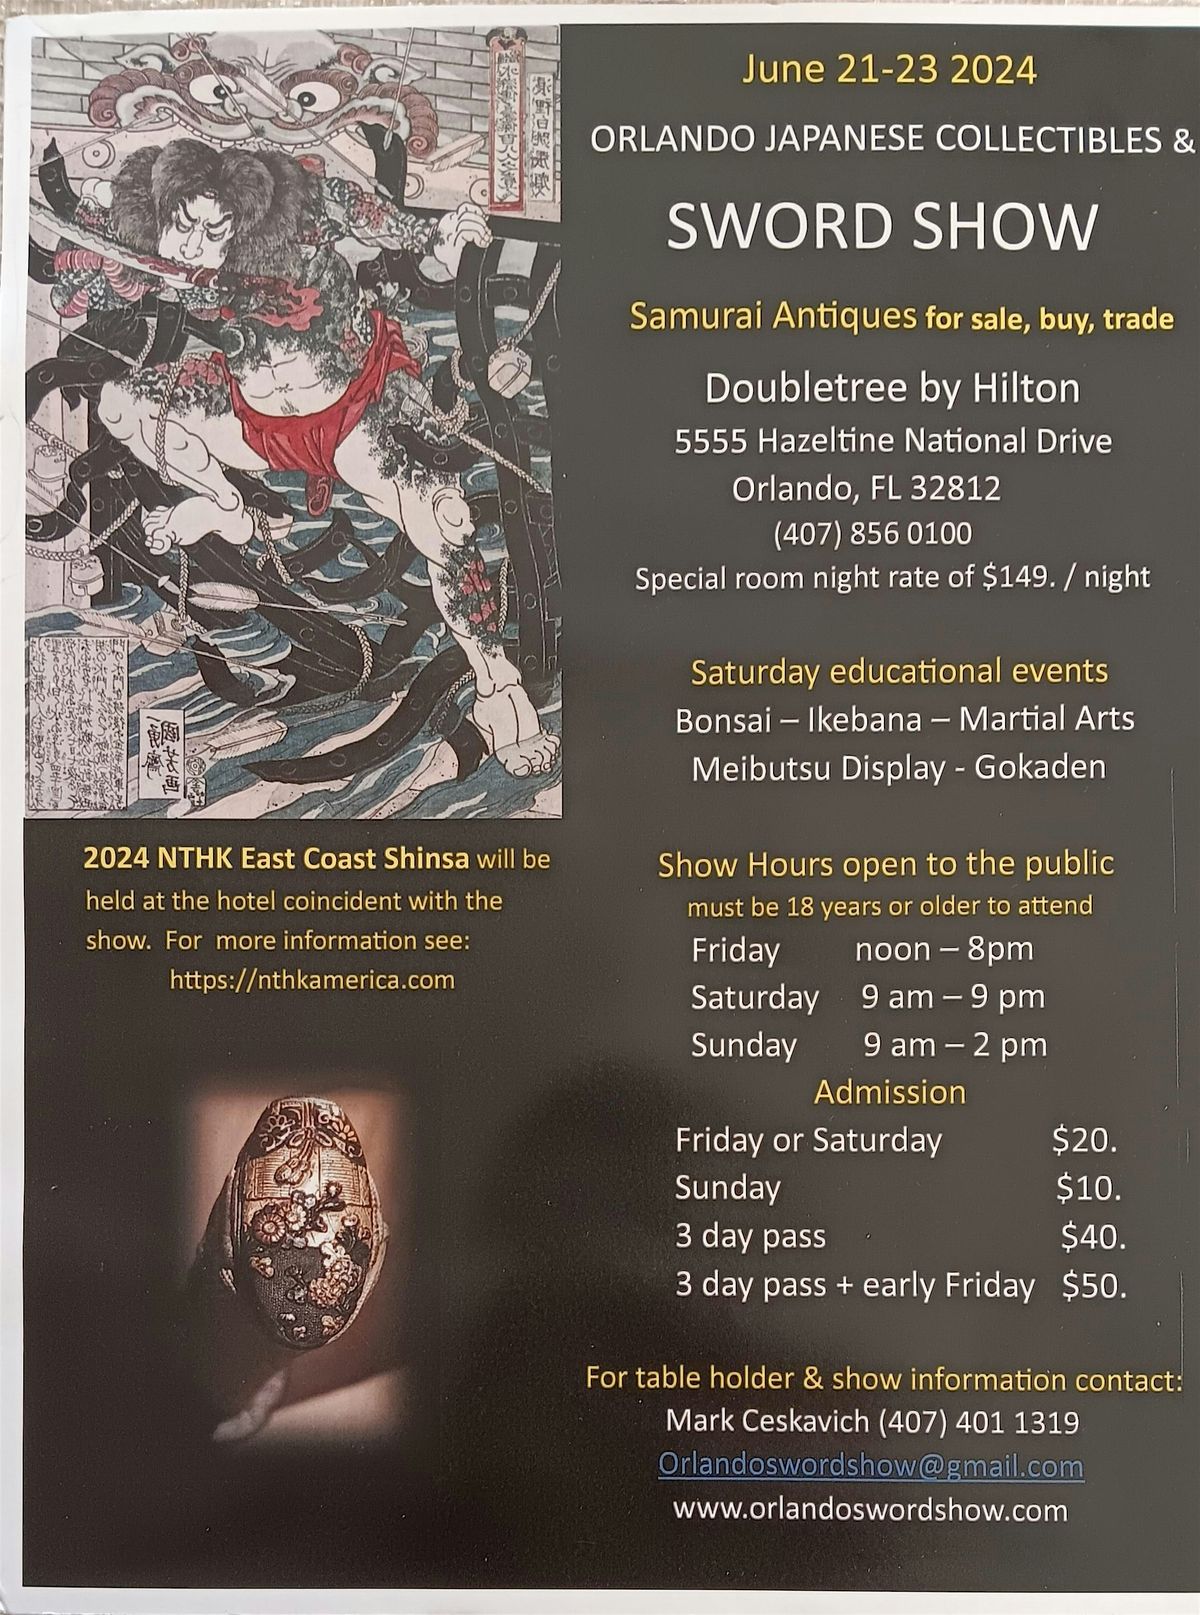 Orlando Japanese Antiques and Sword Show